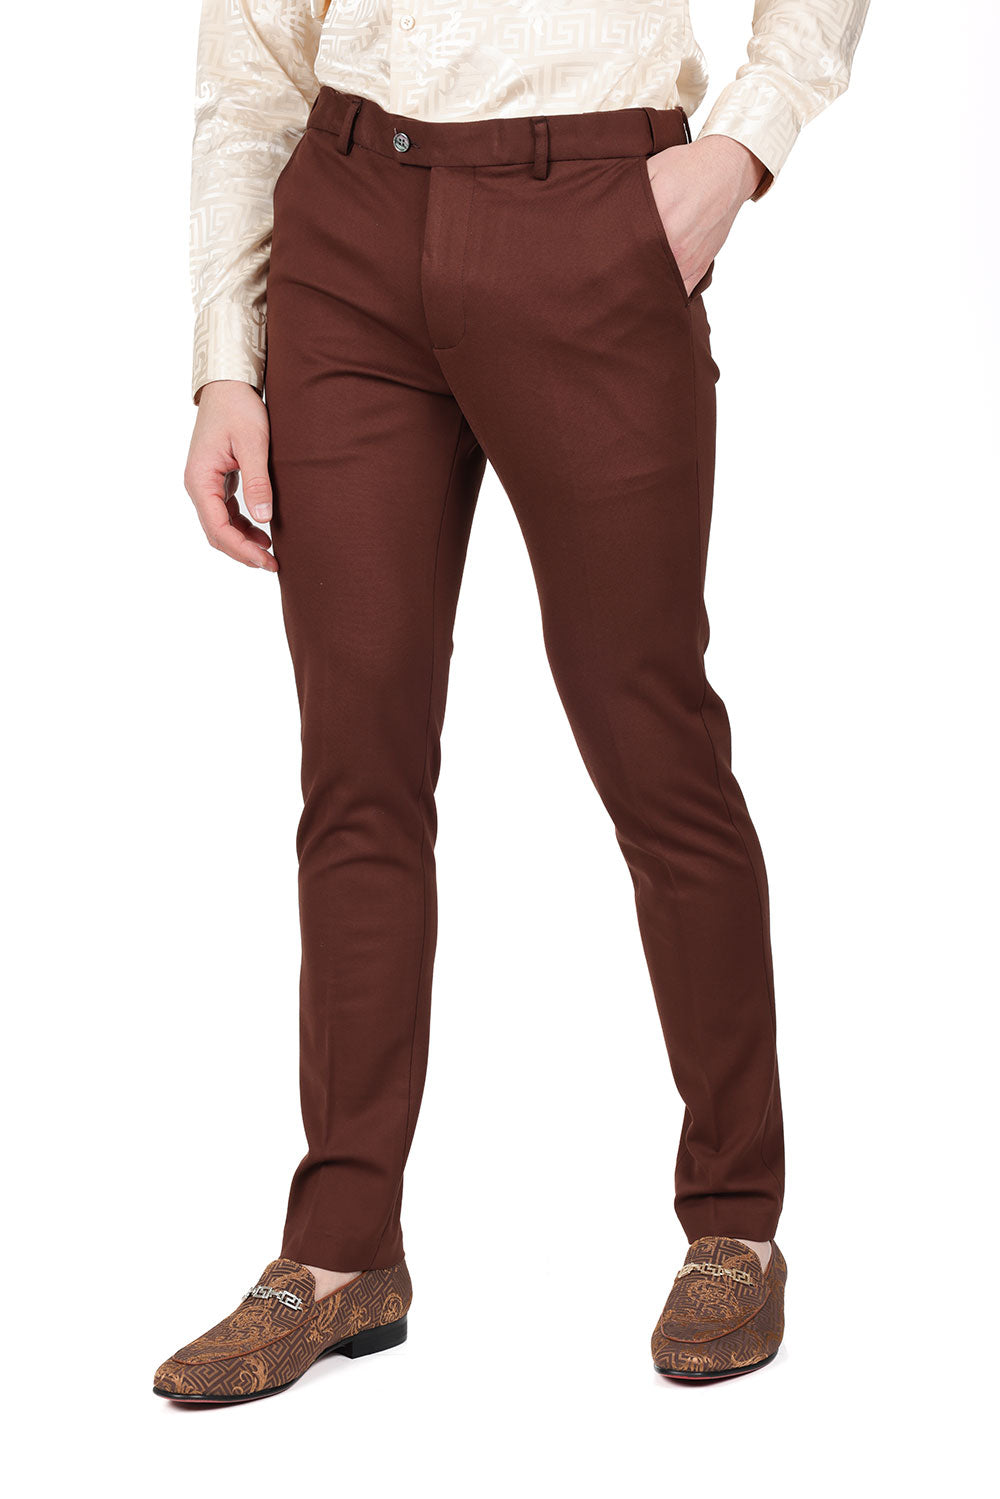 Barabas Men's Solid Color Essential Chino Dress Stretch Pants CP4007 Chocolate